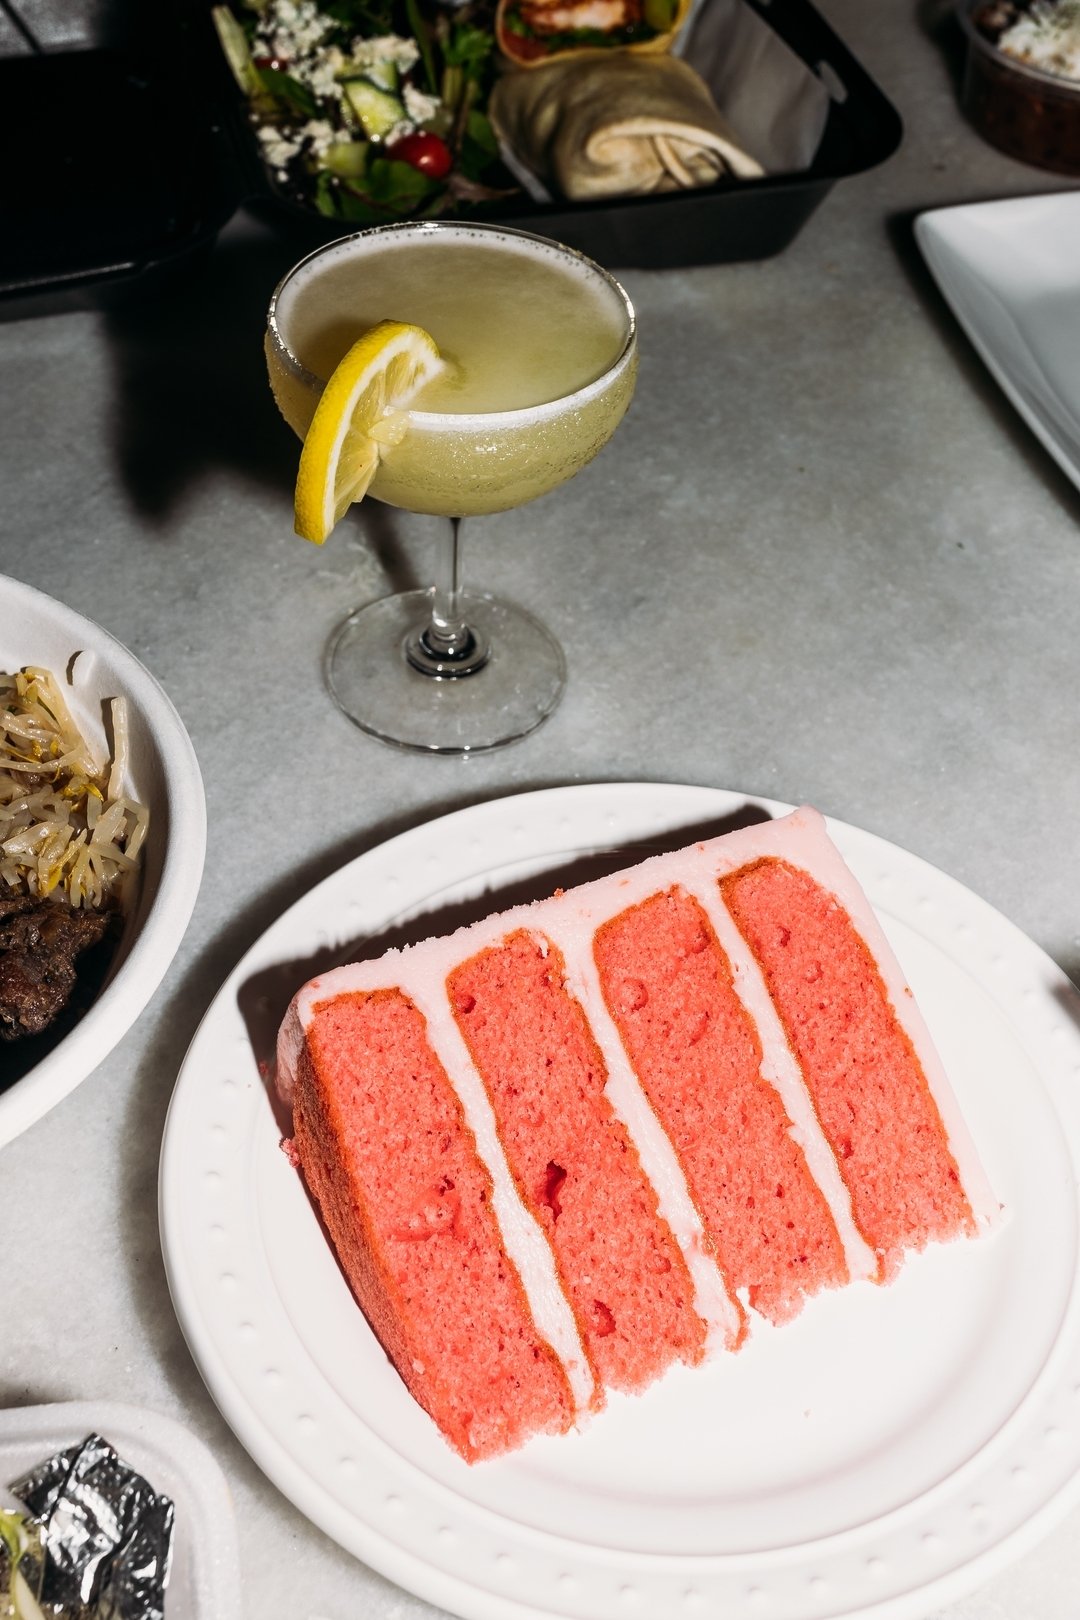 Indulge in a perfect pairing leading into the weekend: cocktails and cake!  Let's toast to the sweet moments ahead. 

🍹: @thelouisbham
🍰: @ashleymacs 

#WeekendVibes #CheersToTheWeekend #thepizitz #foodhall